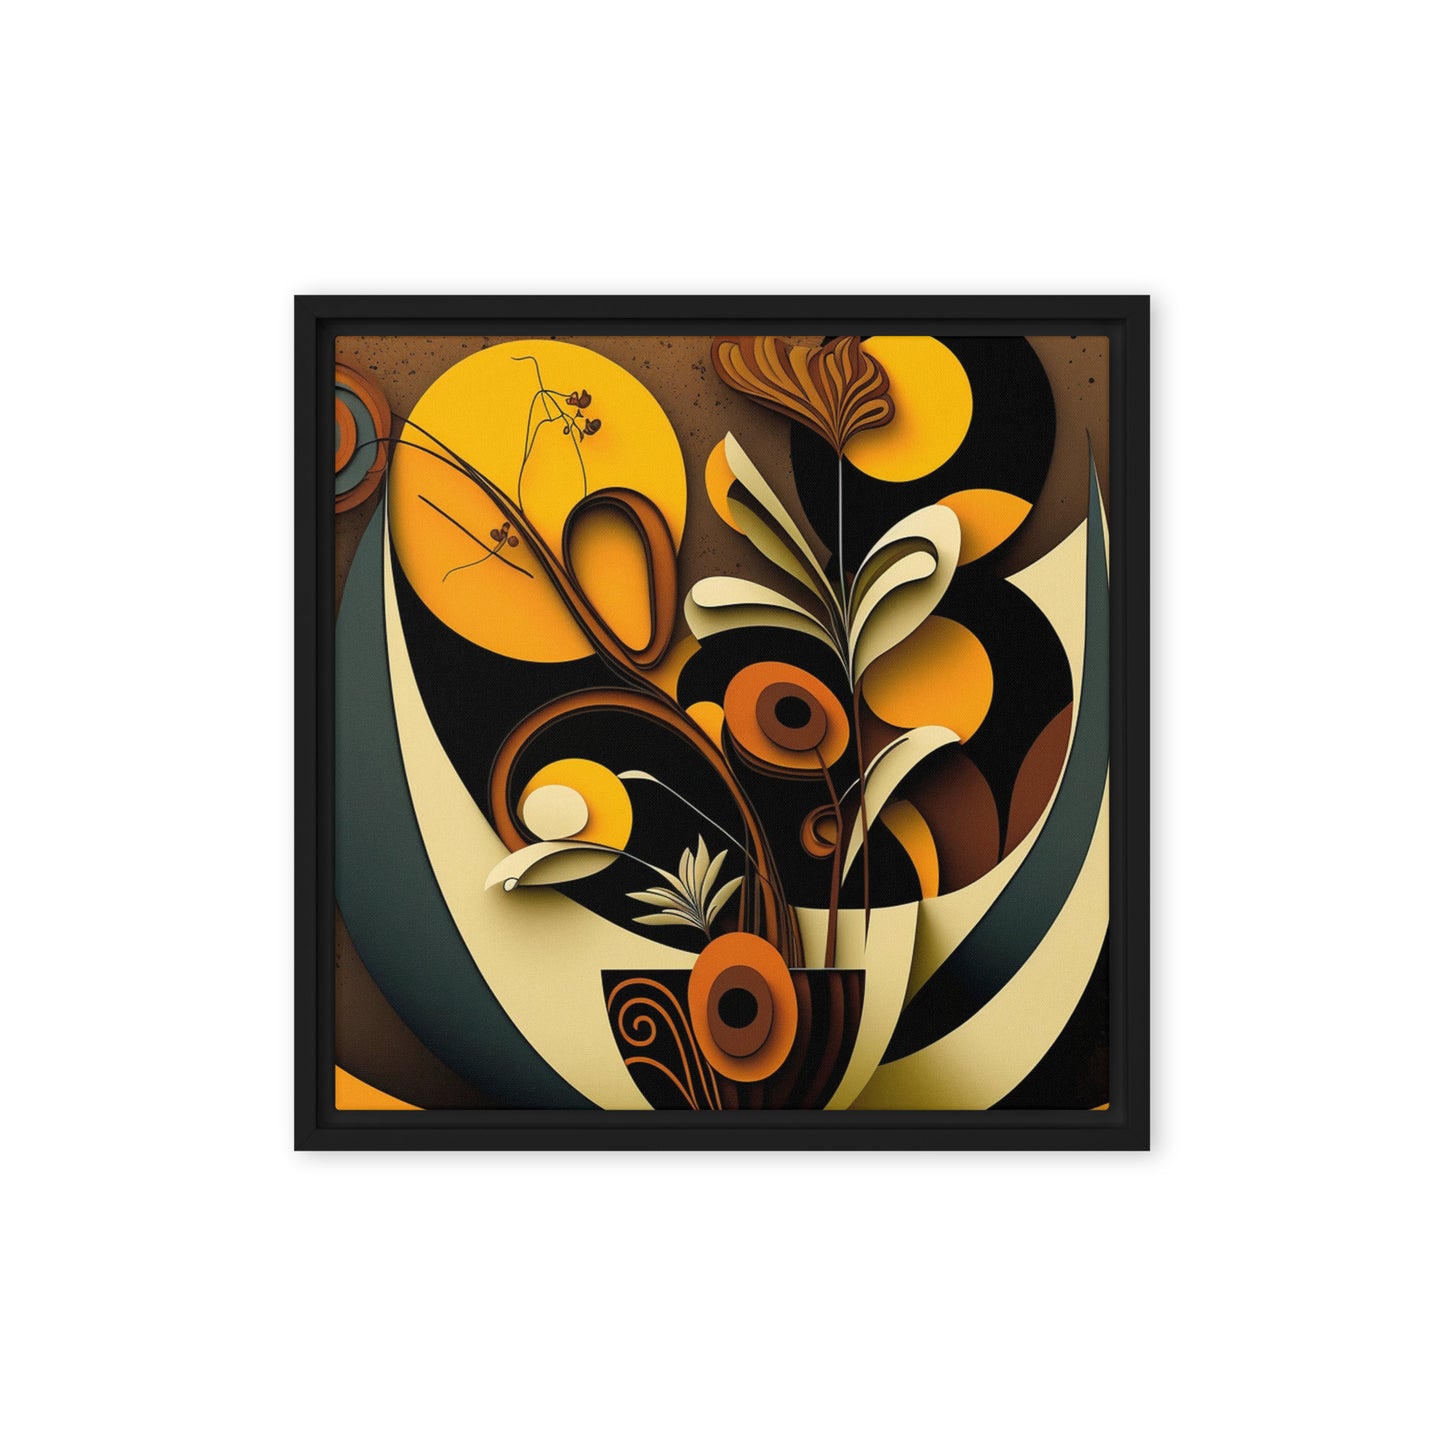 'BLOOM' abstract African design: Framed canvas art